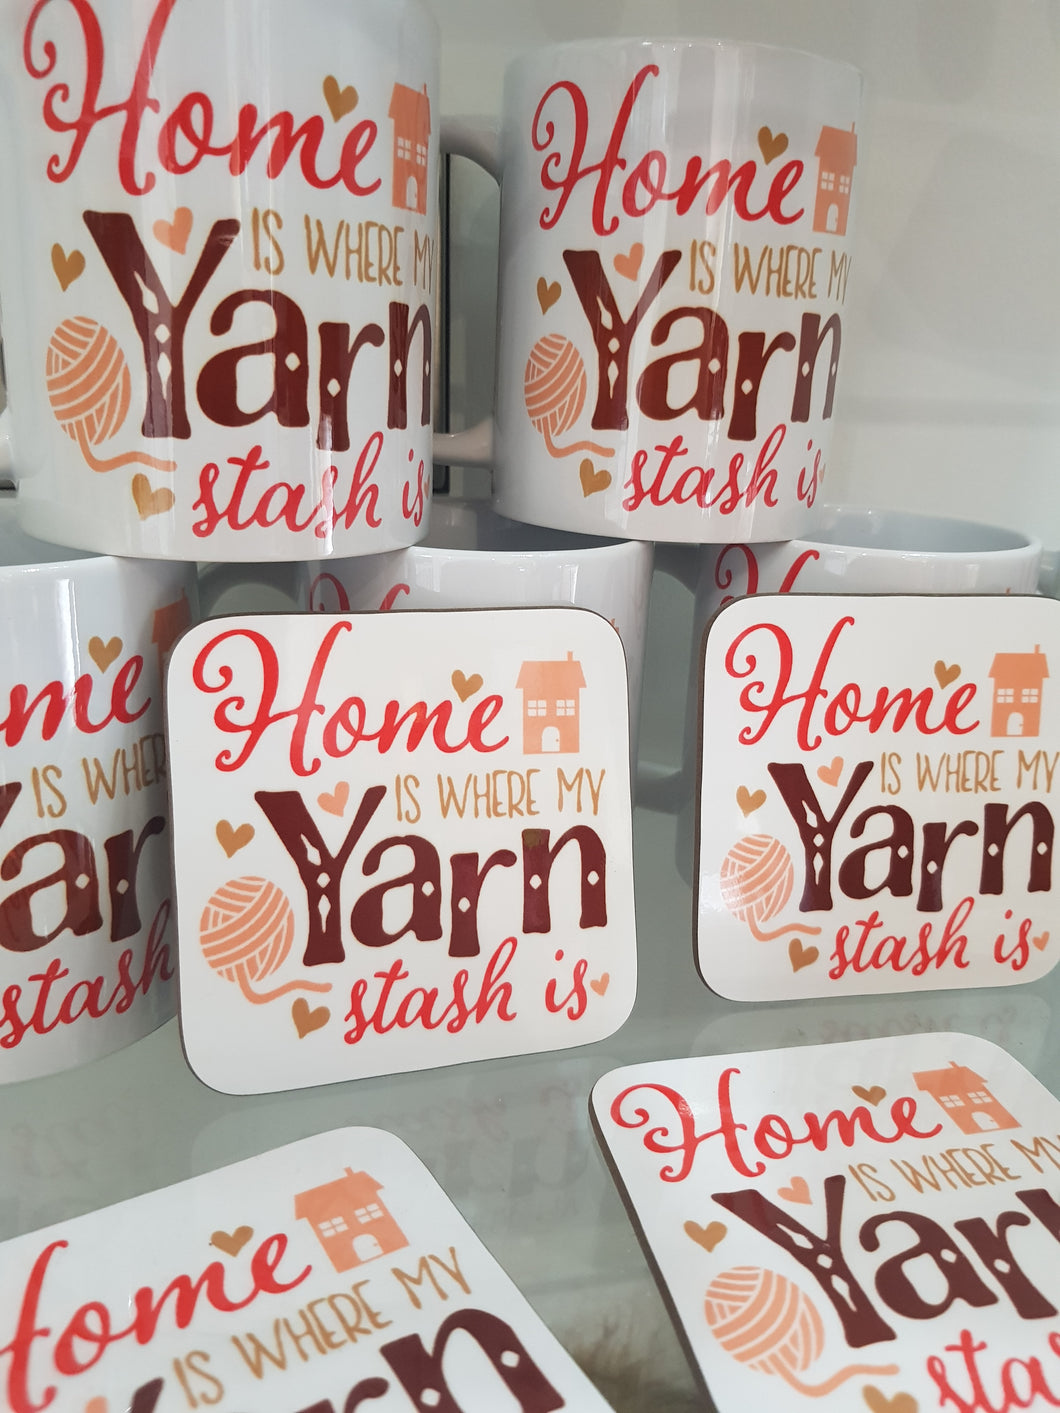 'Home is where the yarn stash is' Coaster